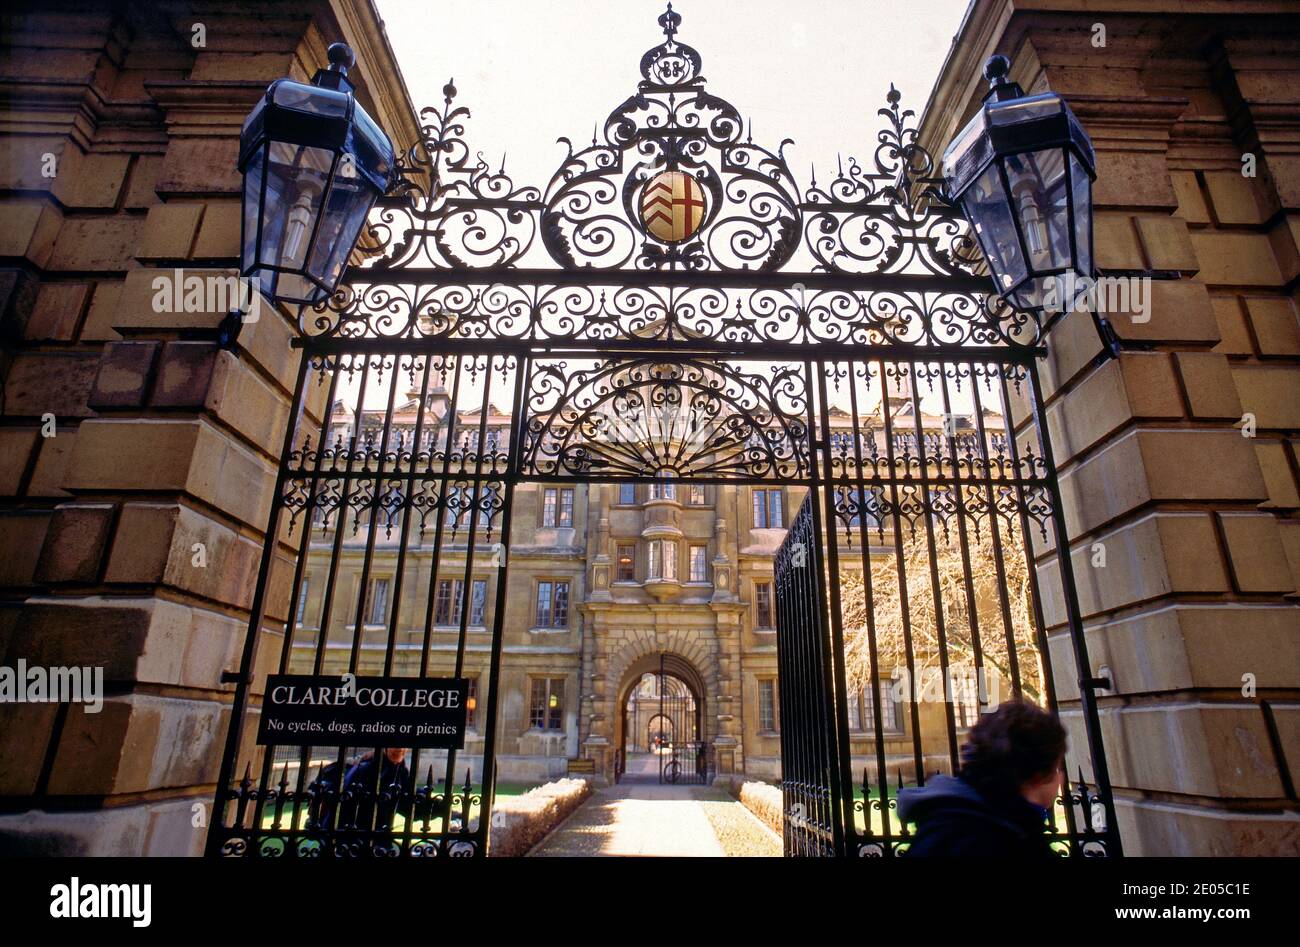 Clare College Cambridge University - main entrance to Clare College, part of the University of Cambridge, founded in 1326. Stock Photo